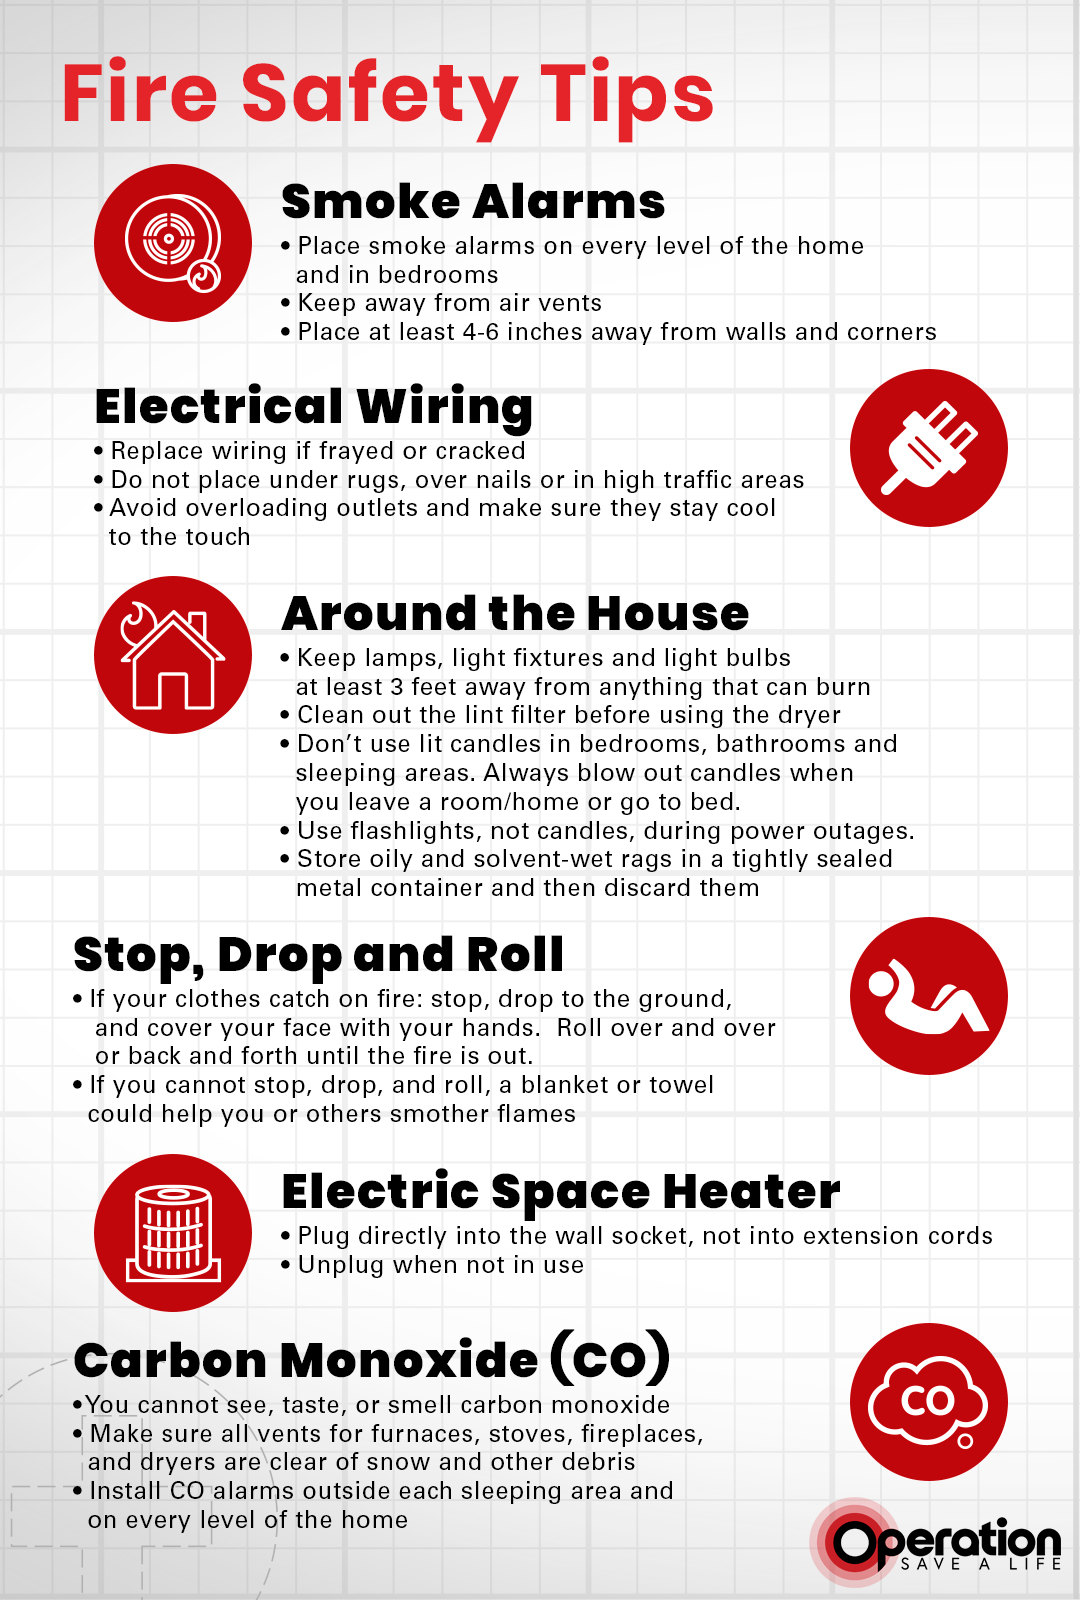 Fire Safety Tip infographic